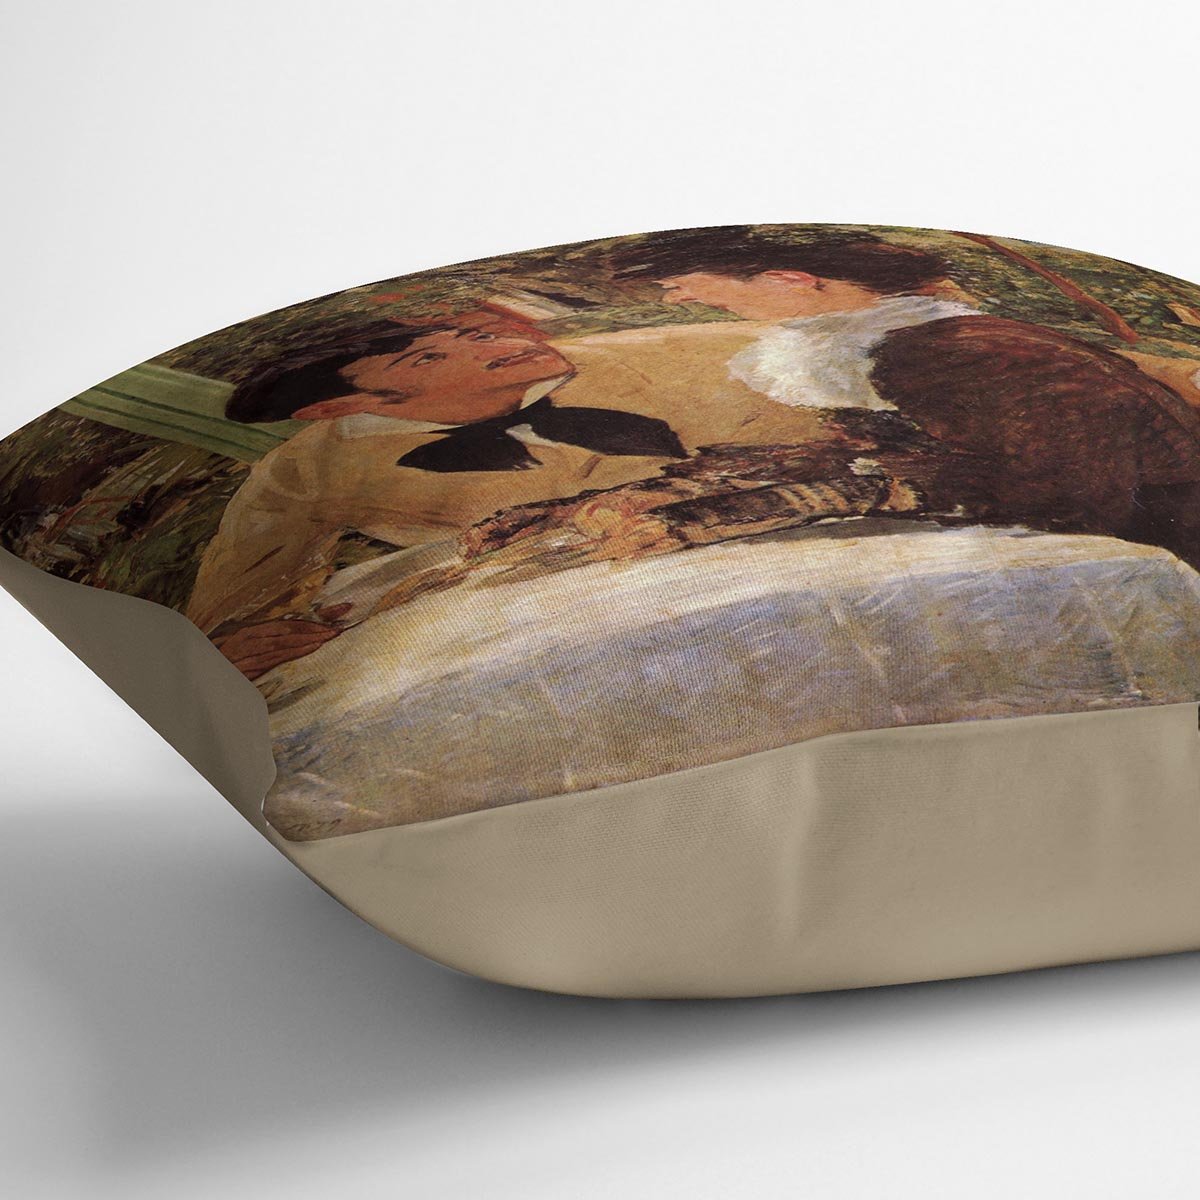 Pare Lathuille by Manet Throw Pillow